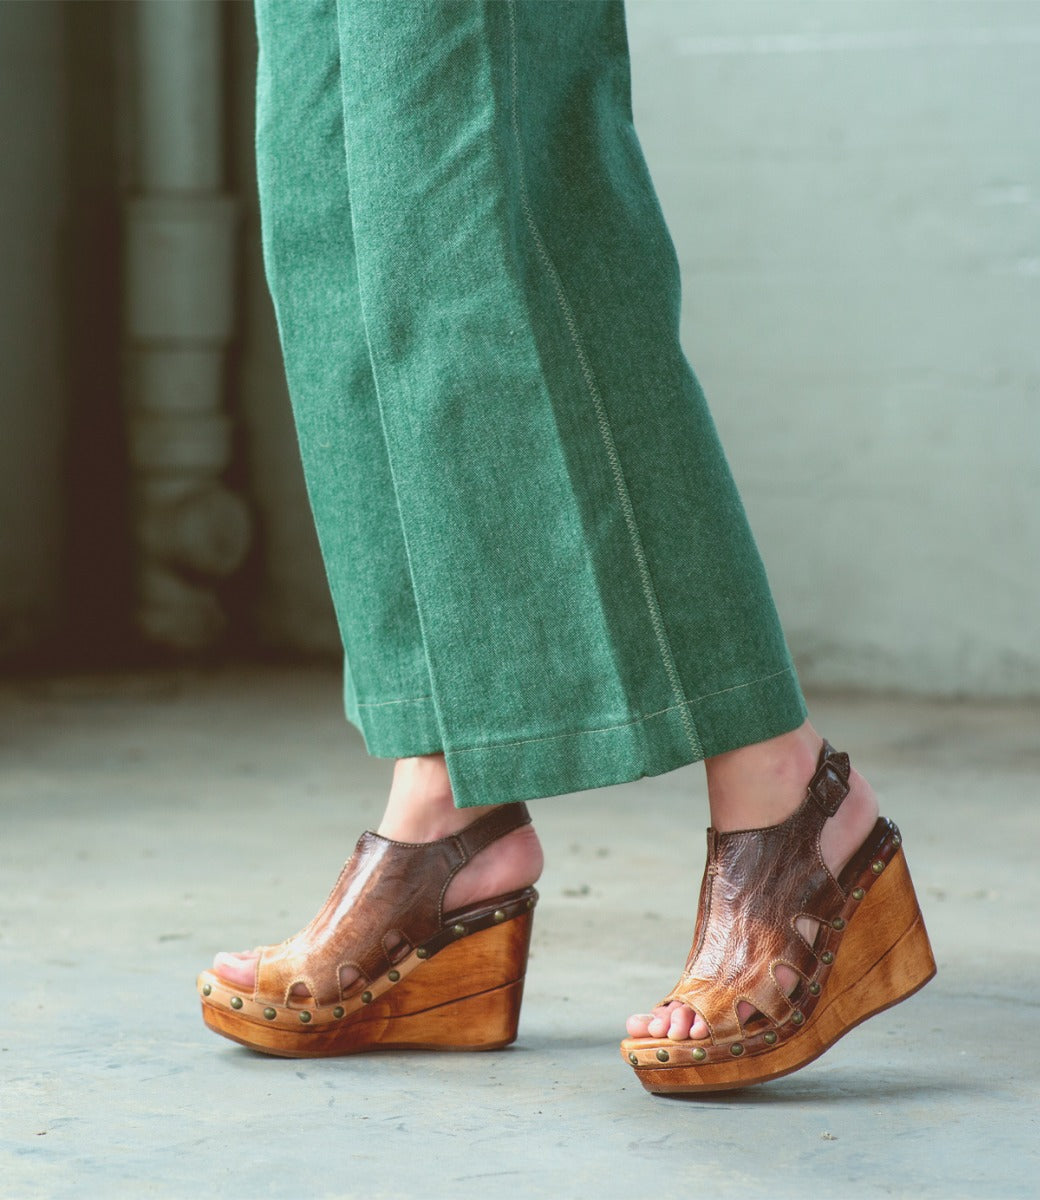 A woman wearing green pants and Bed Stu wooden wedges.